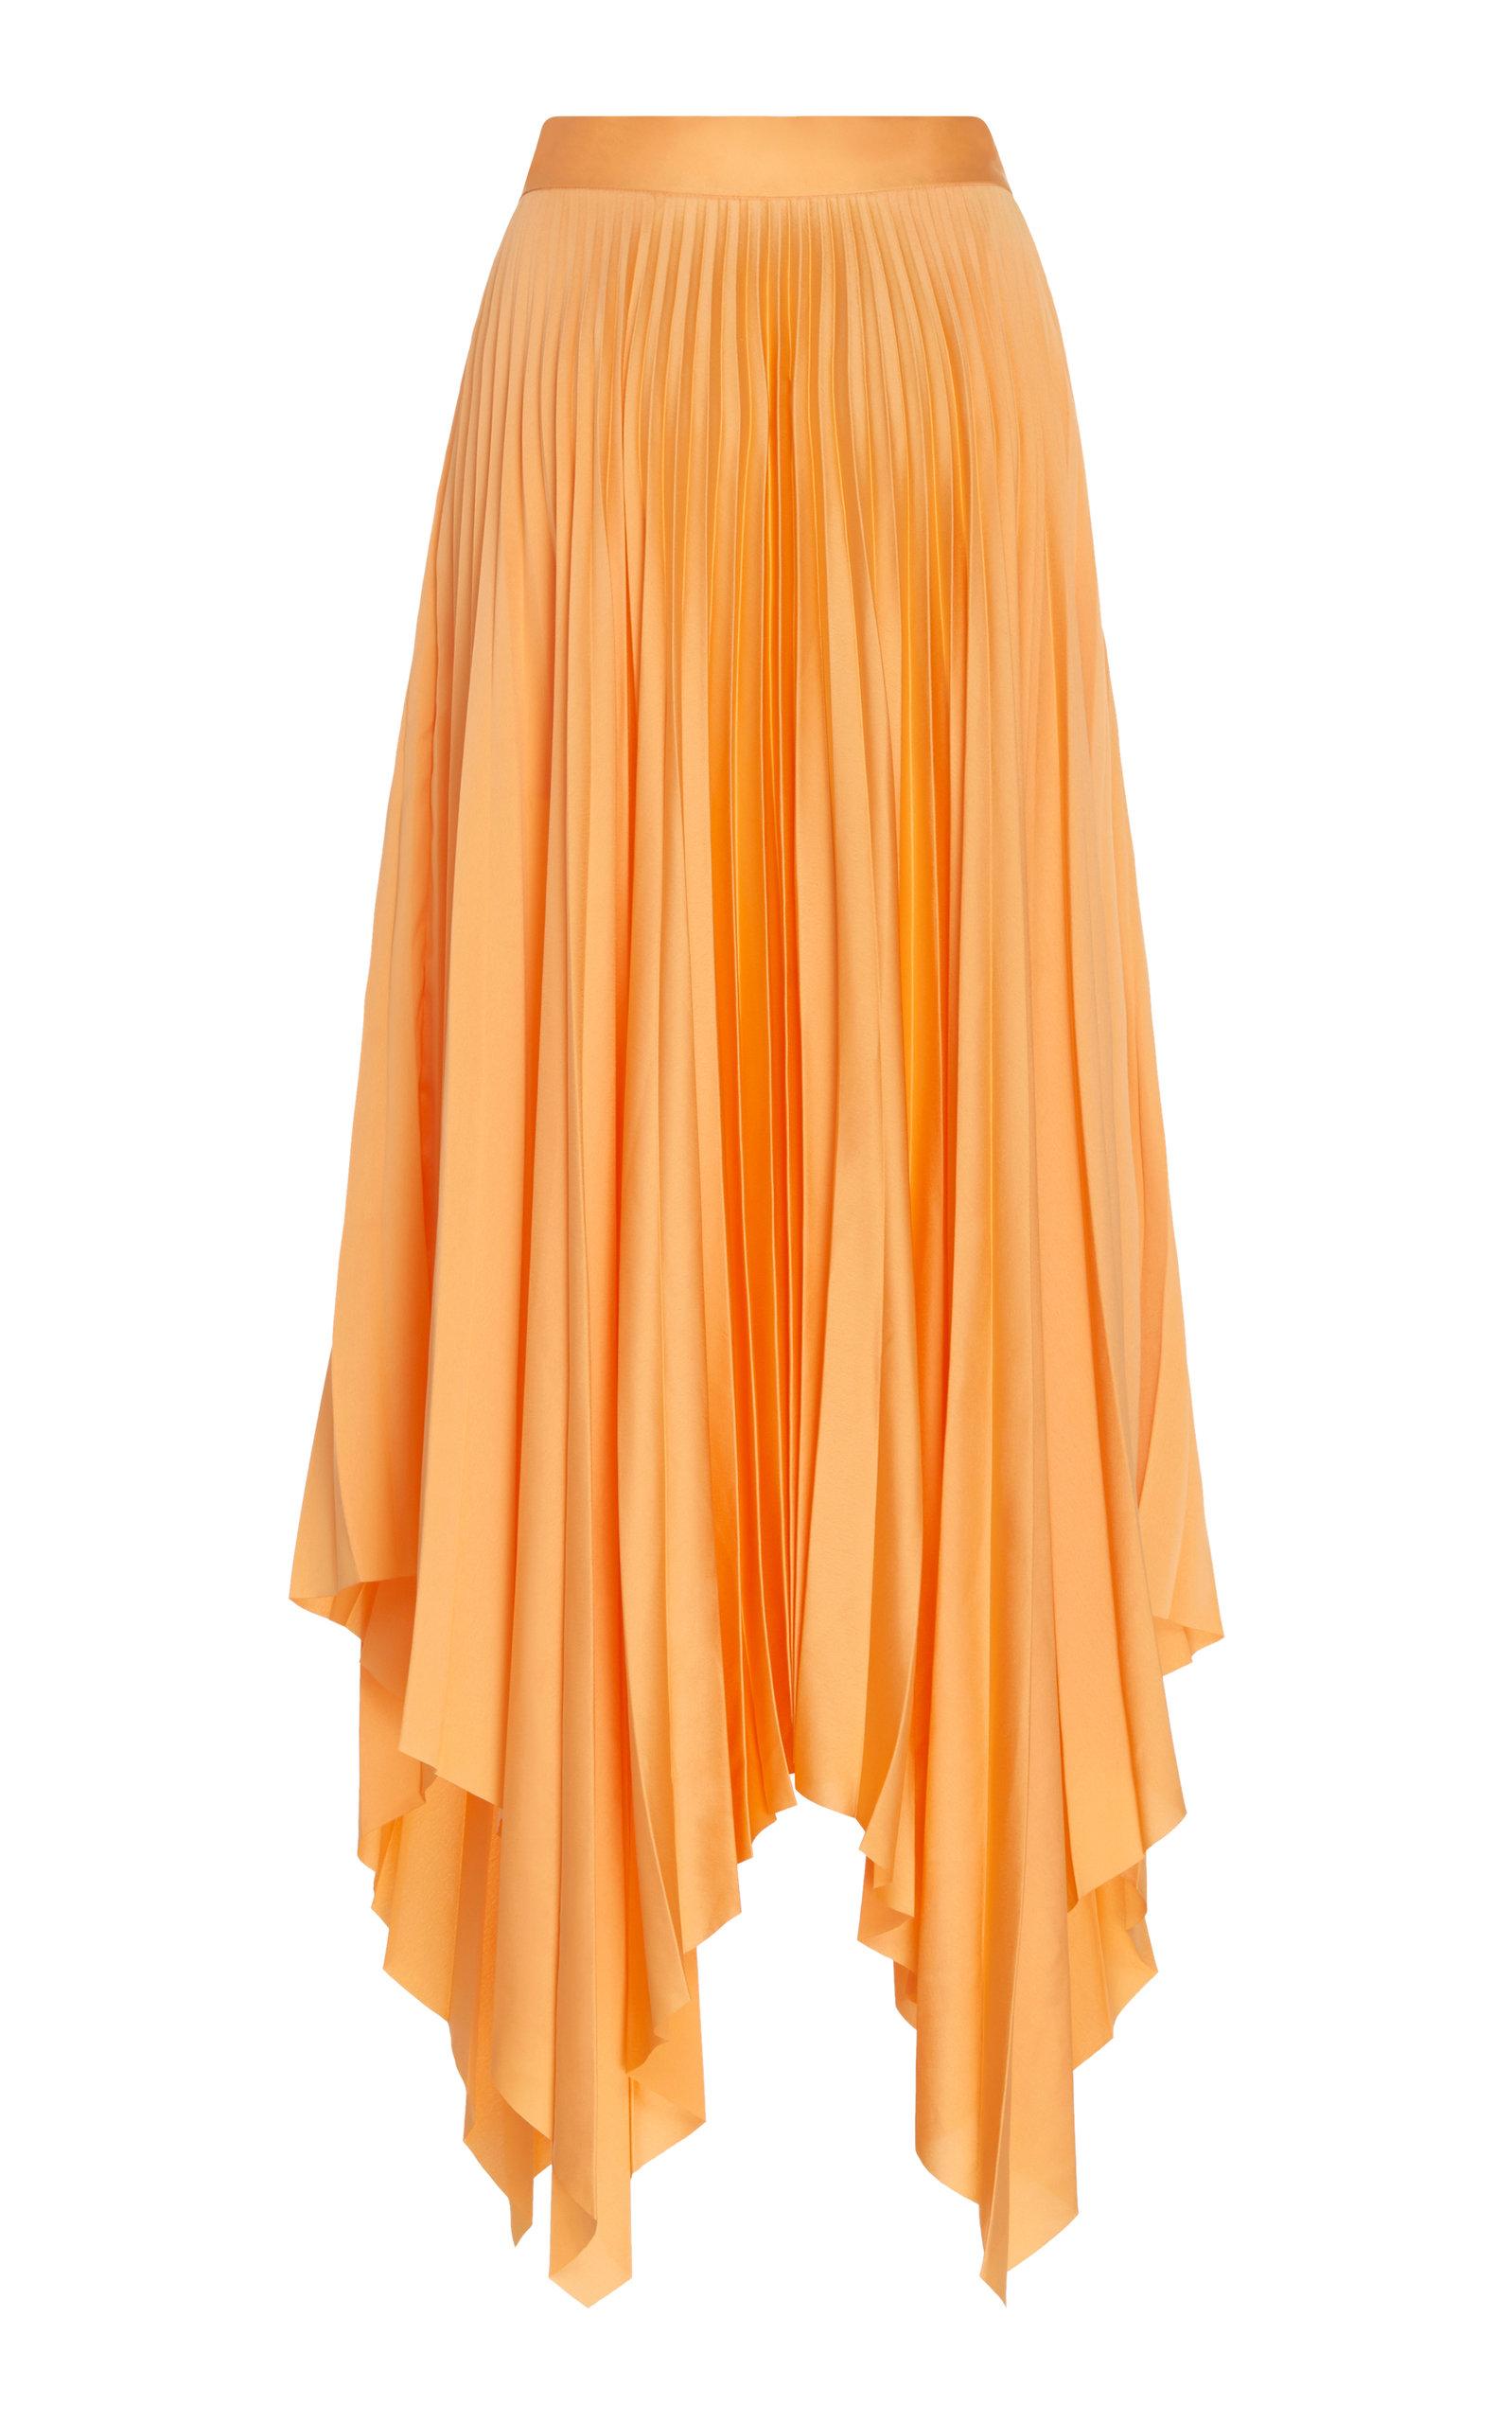 Significant Other Synthetic Eden Assymetrical Skirt in Orange - Lyst